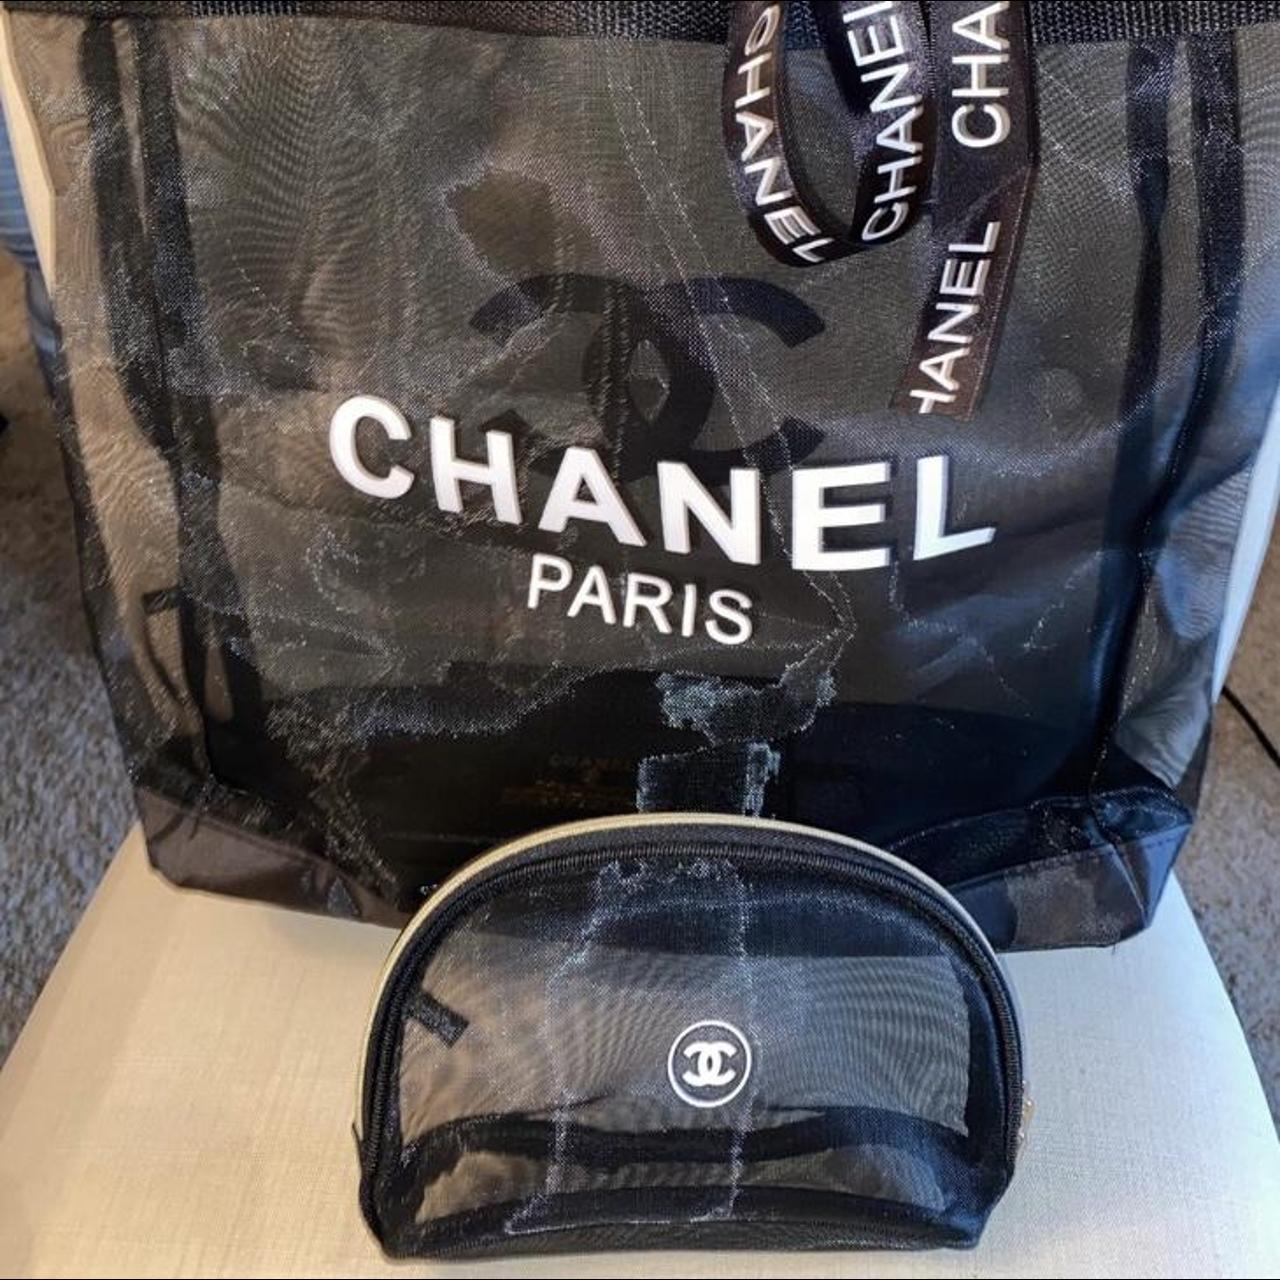 Chanel Mesh Tote - 14 For Sale on 1stDibs  chanel black mesh tote bag, chanel  vip mesh tote, chanel mesh shopping bag